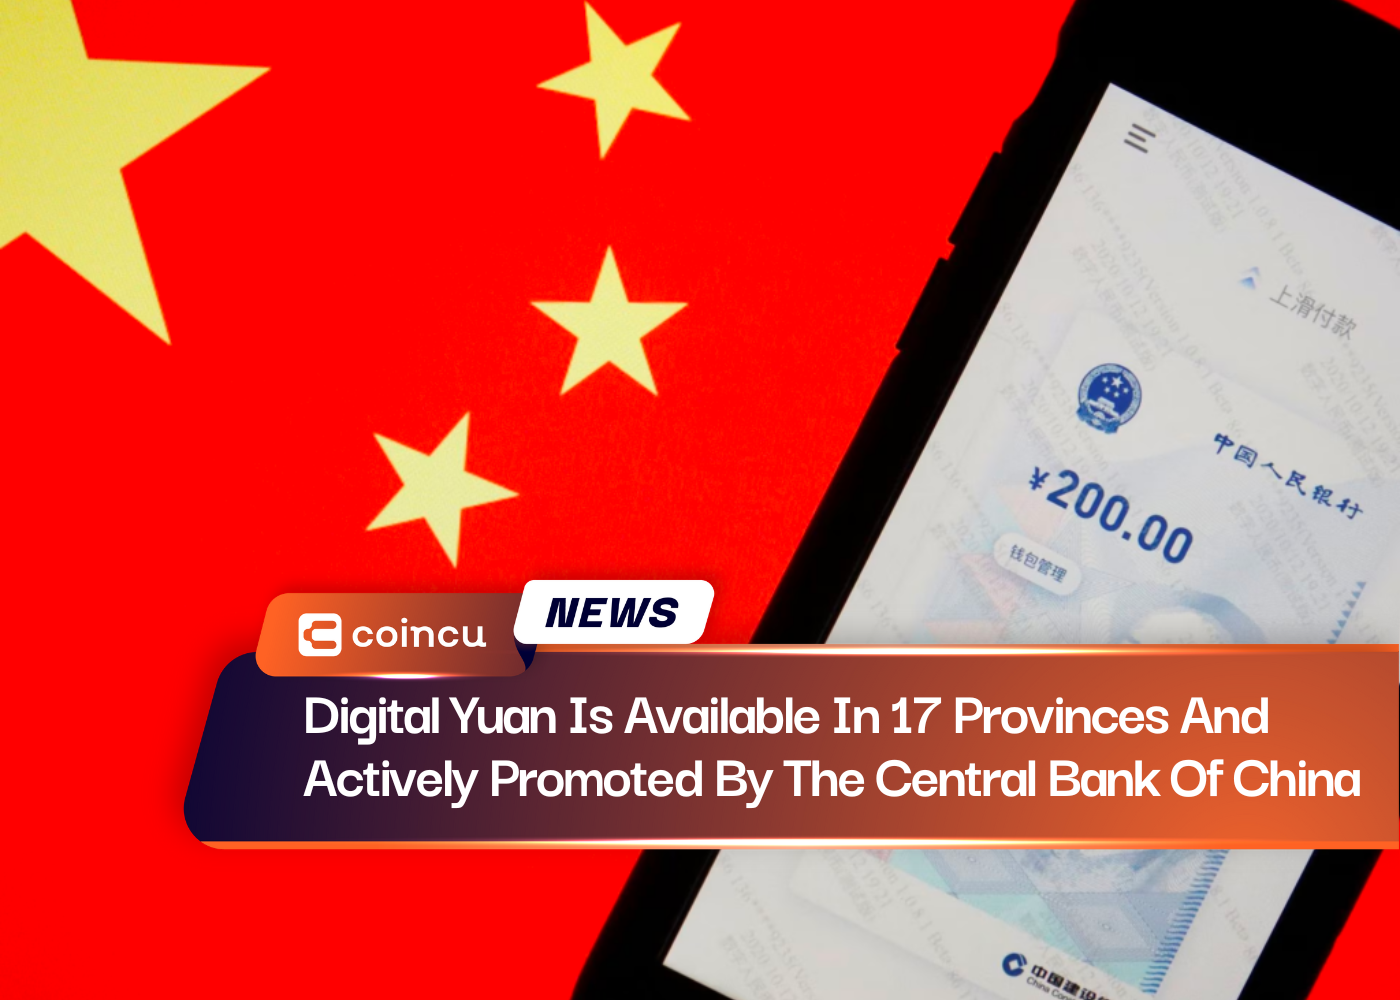 Digital Yuan Is Available In 17 Provinces And Actively Promoted By The Central Bank Of China